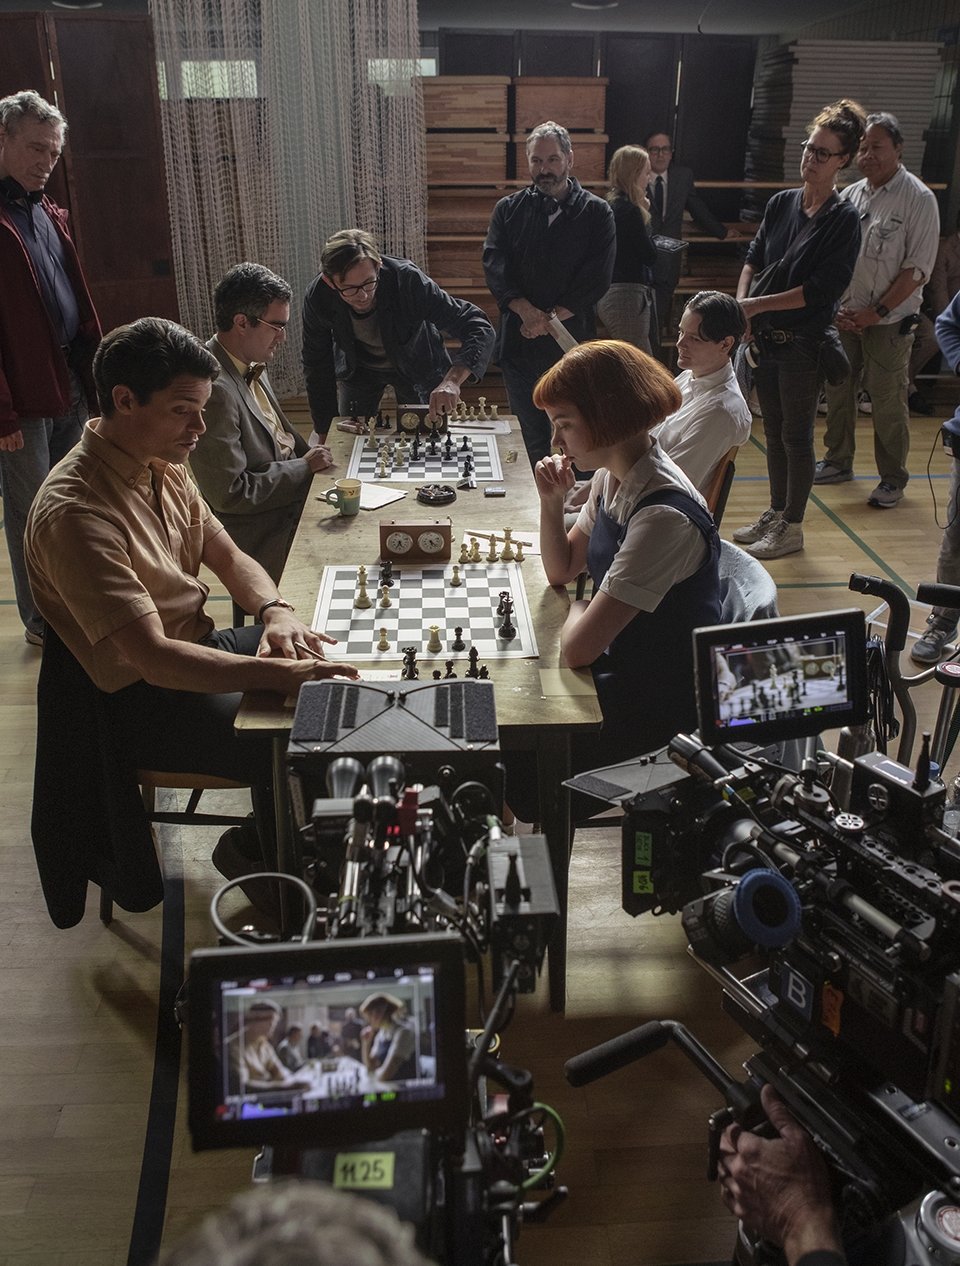 Appreciation post for The Queen's Gambit cinematography. : r/cinematography